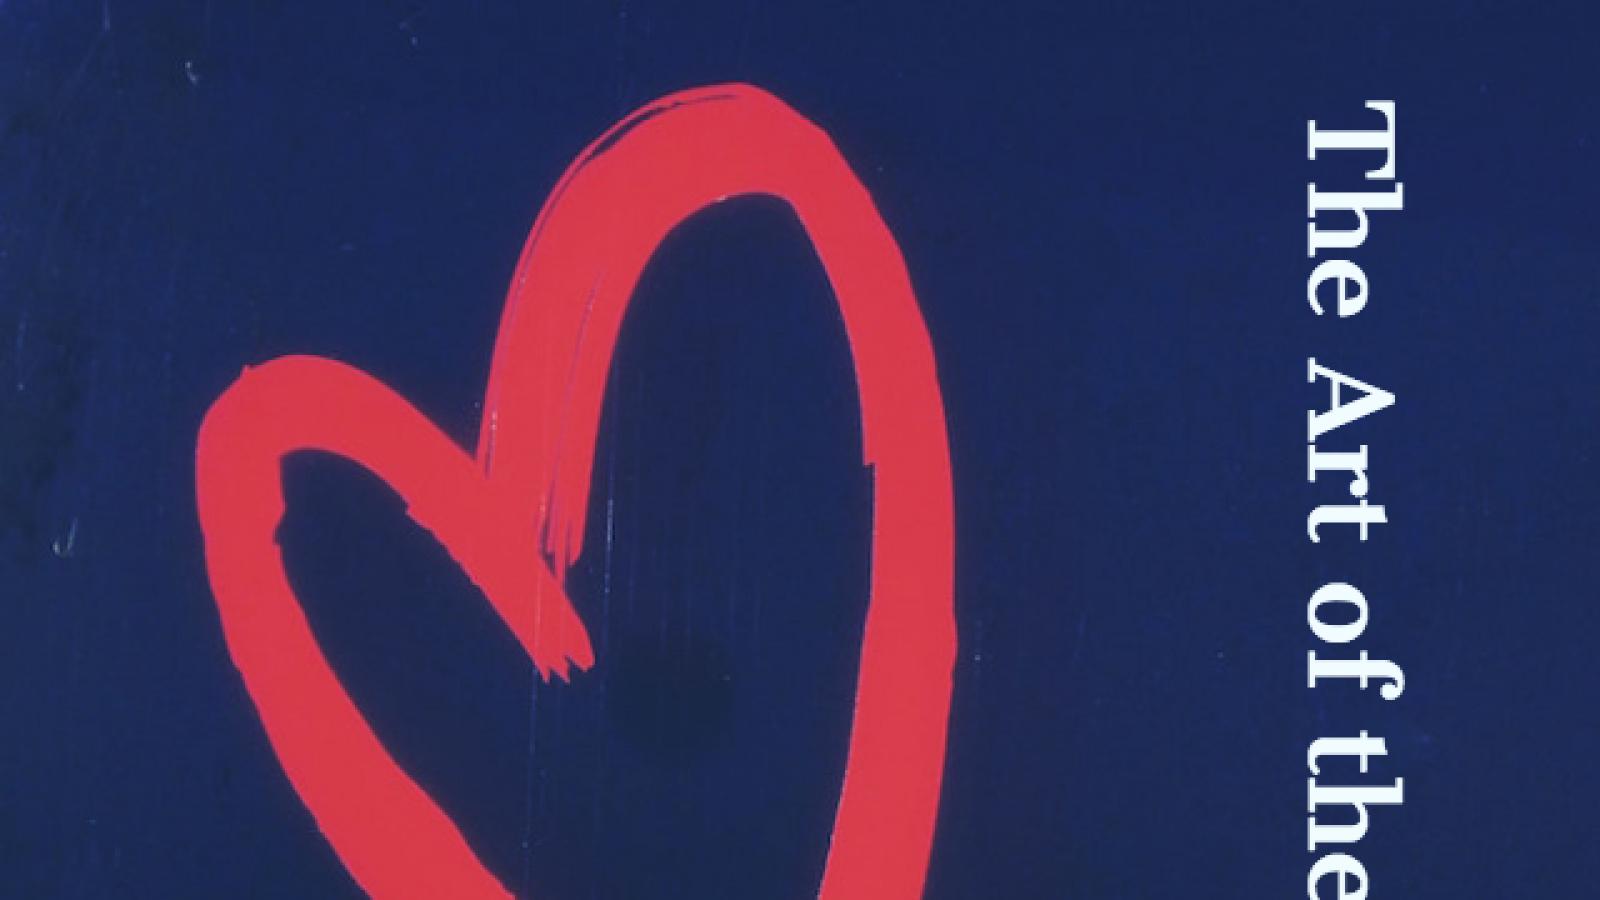 red heart on blue background with text that says The Art of the Valentine